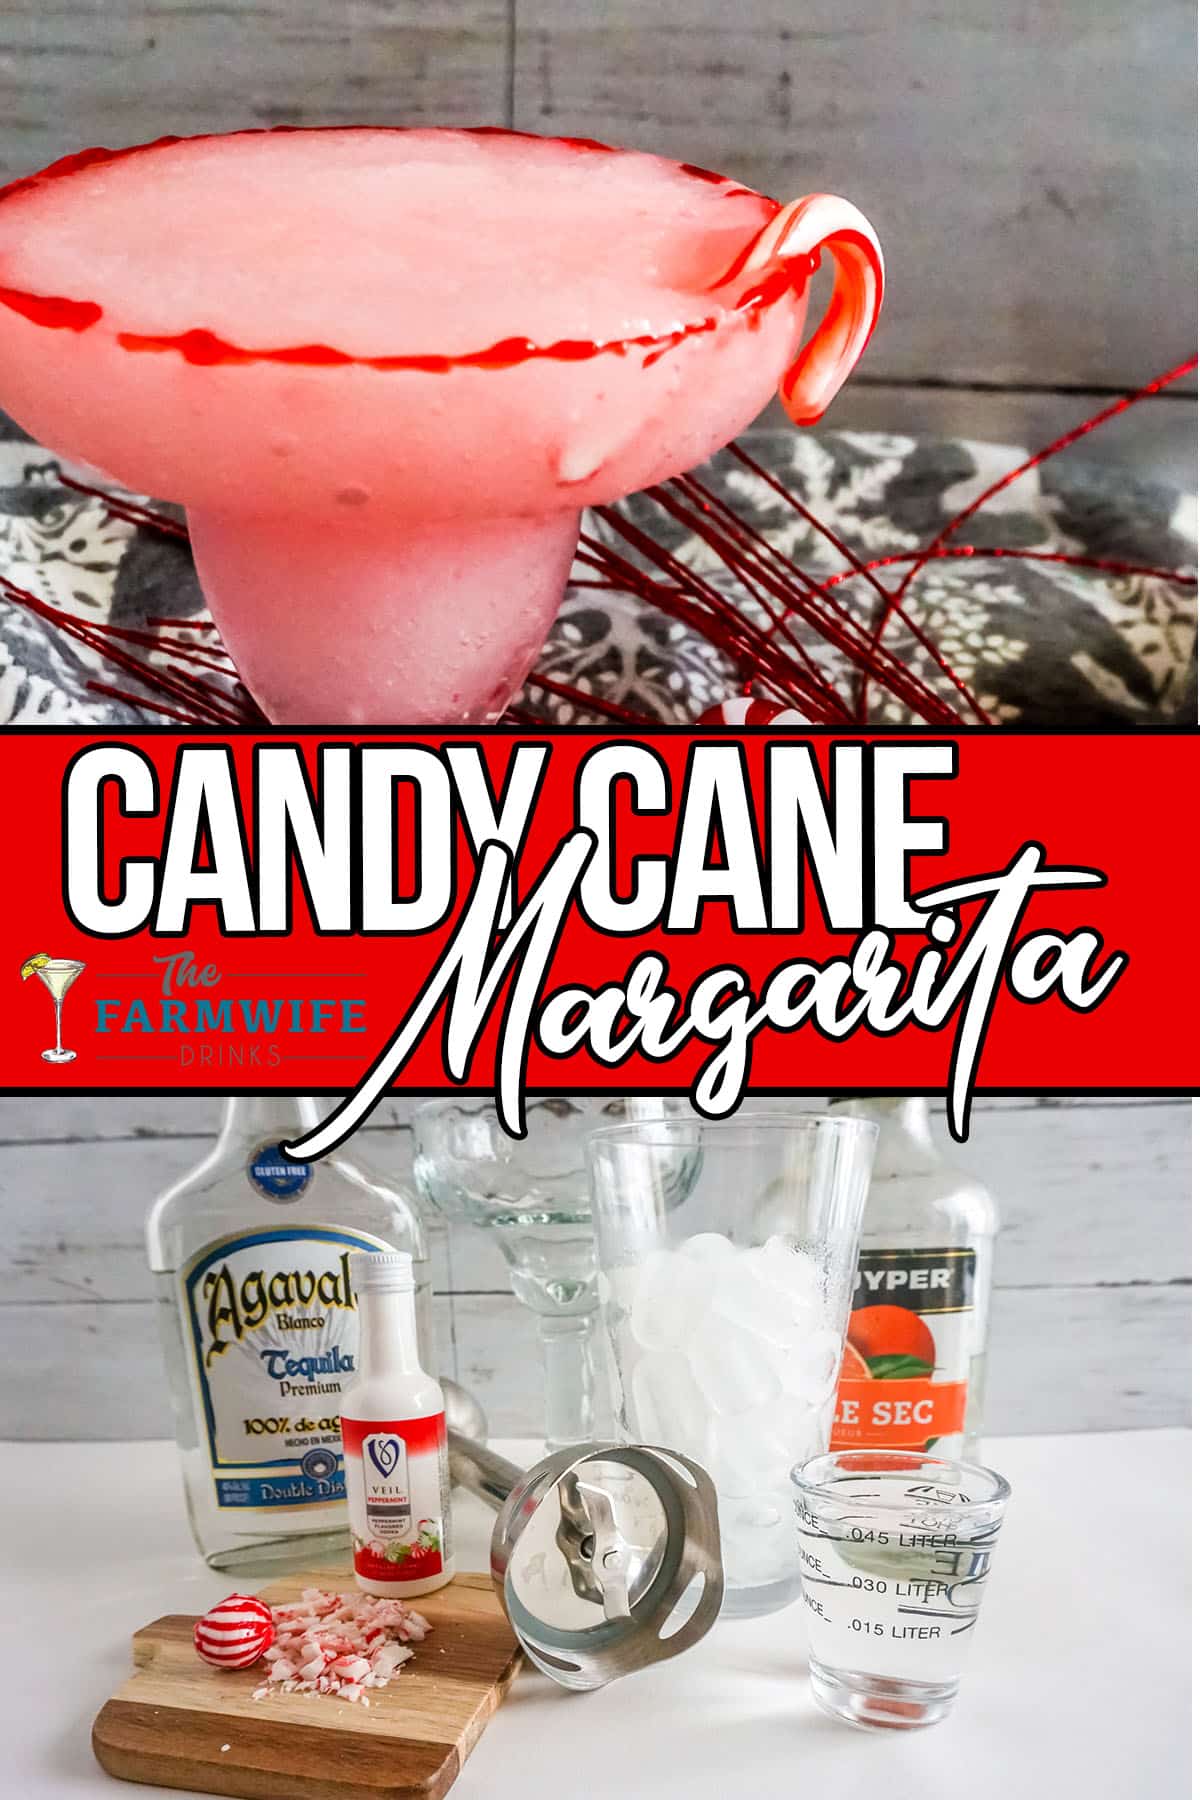 Ingredients for the Candy Margarita and candy displayed with frozen drink.